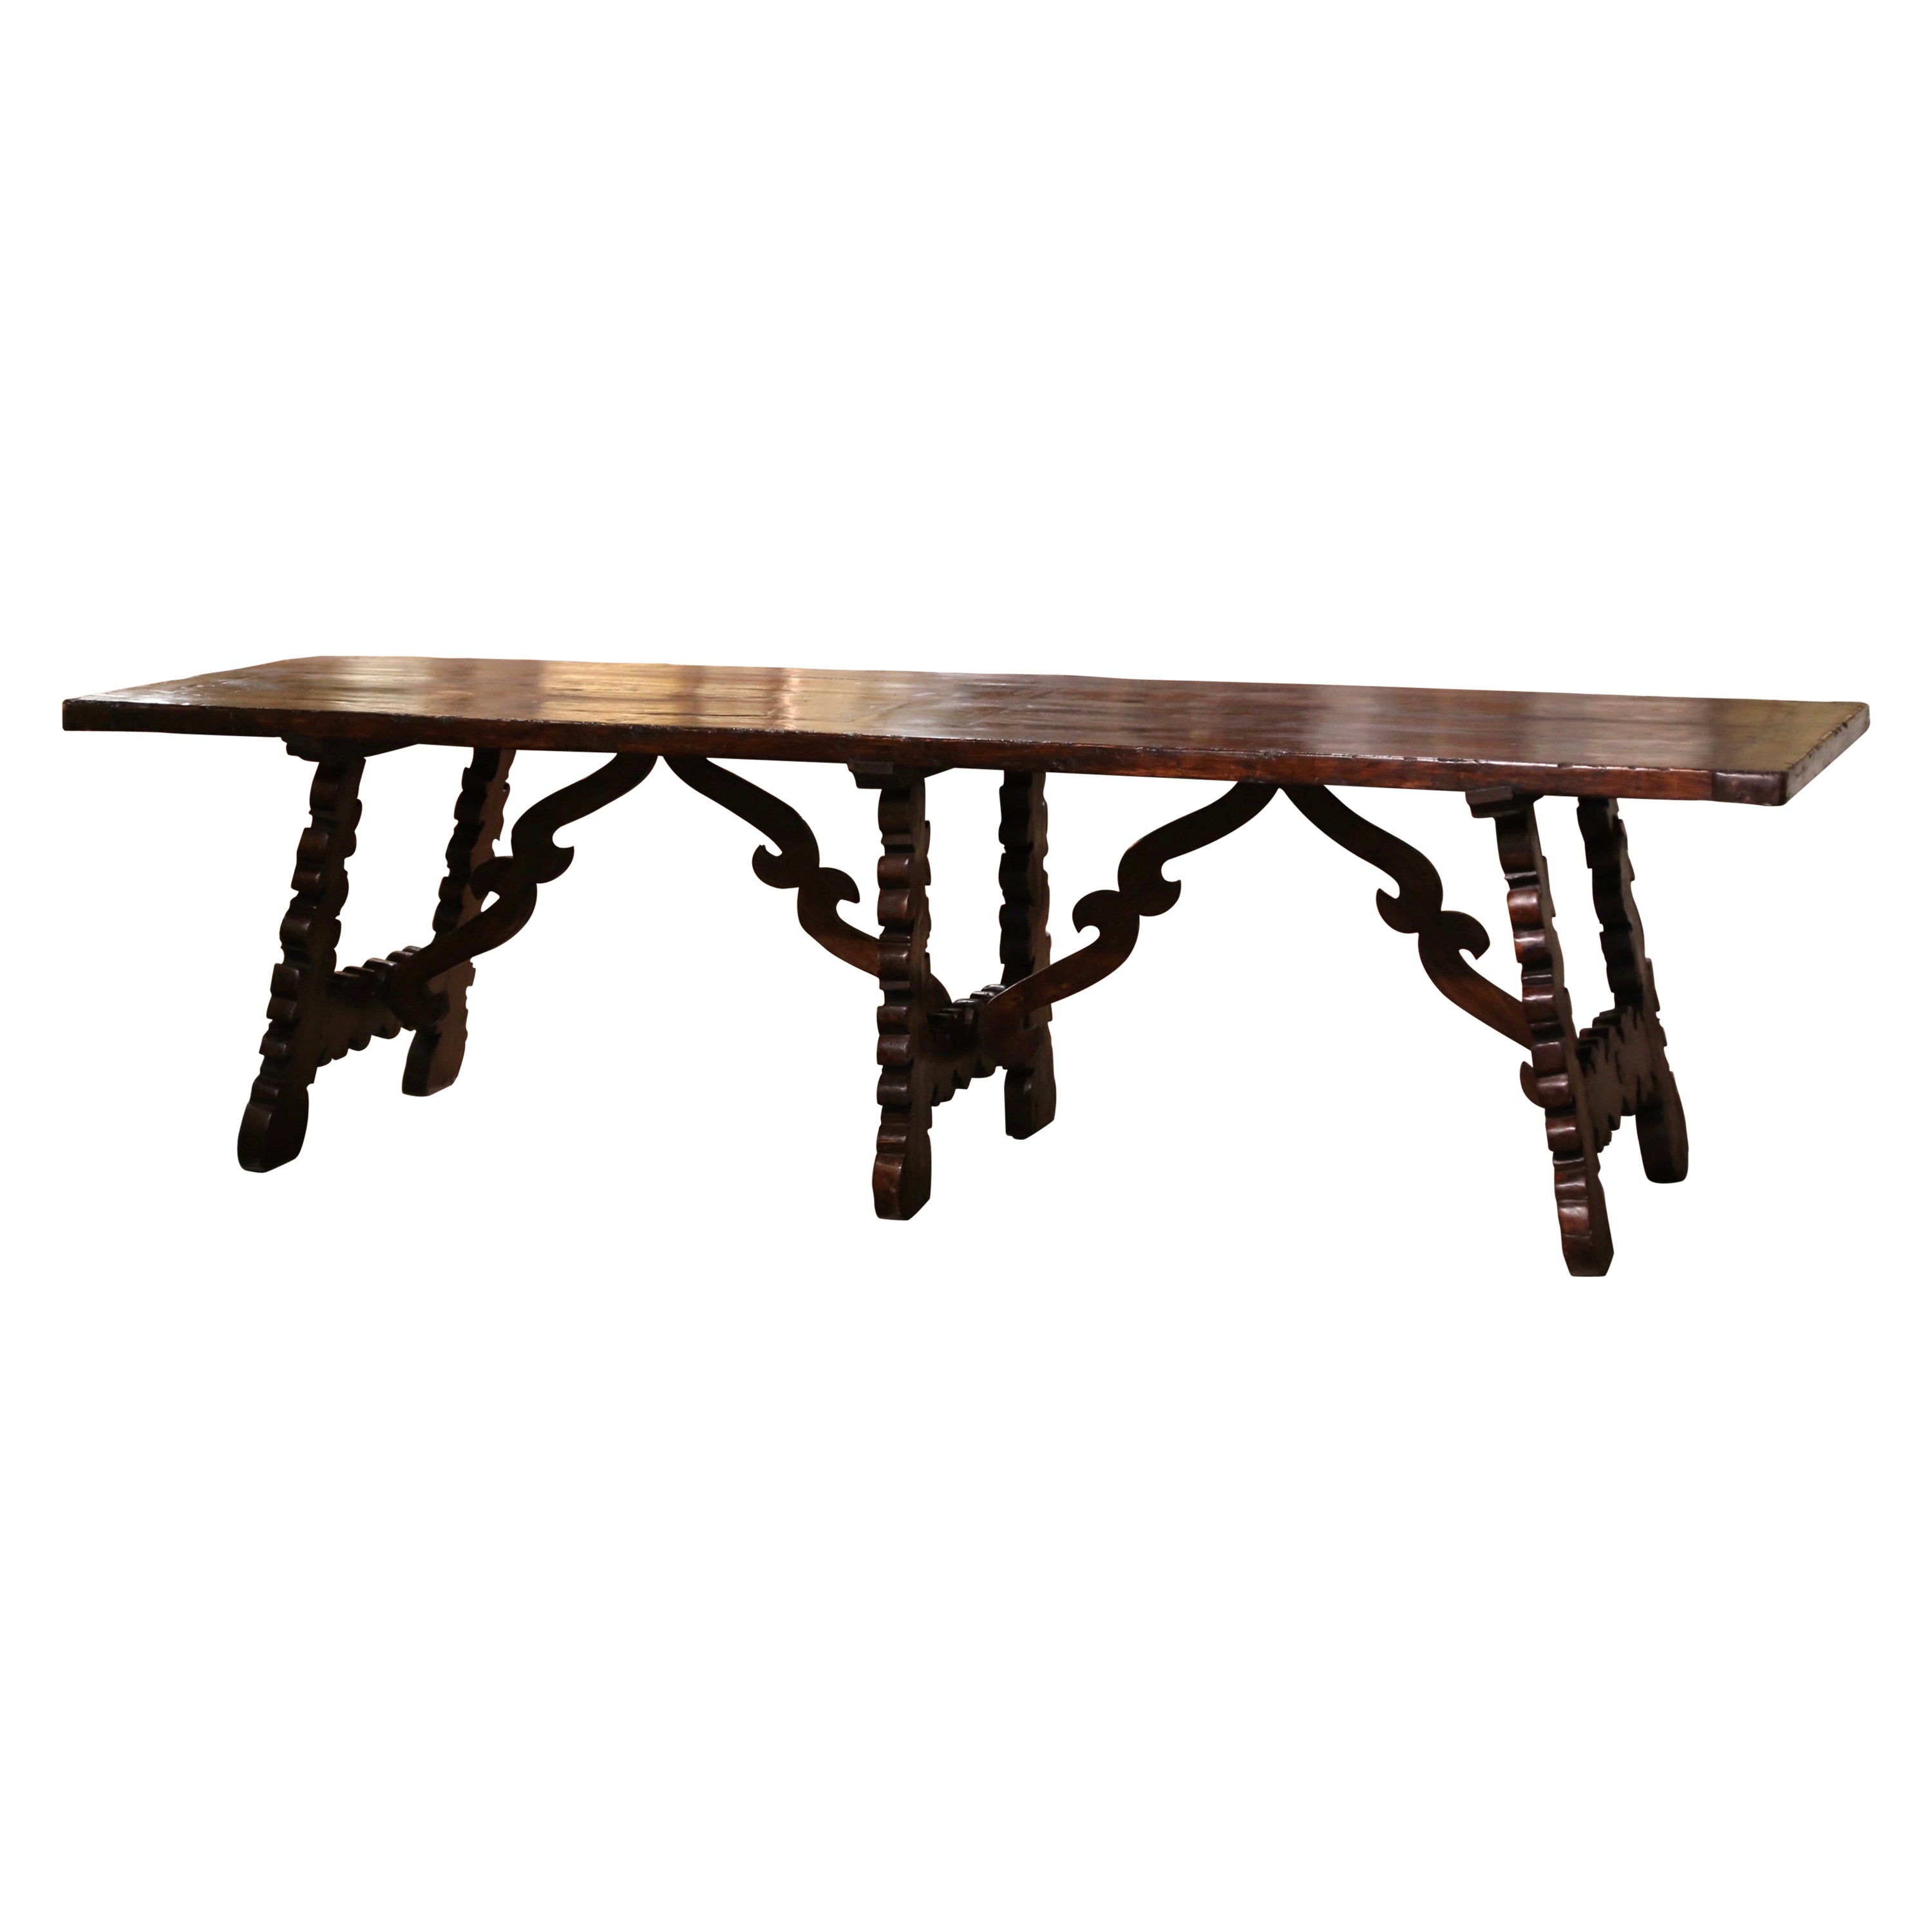 19th Century Spanish Carved Walnut Three-Leg Trestle Dining Table with Stretcher